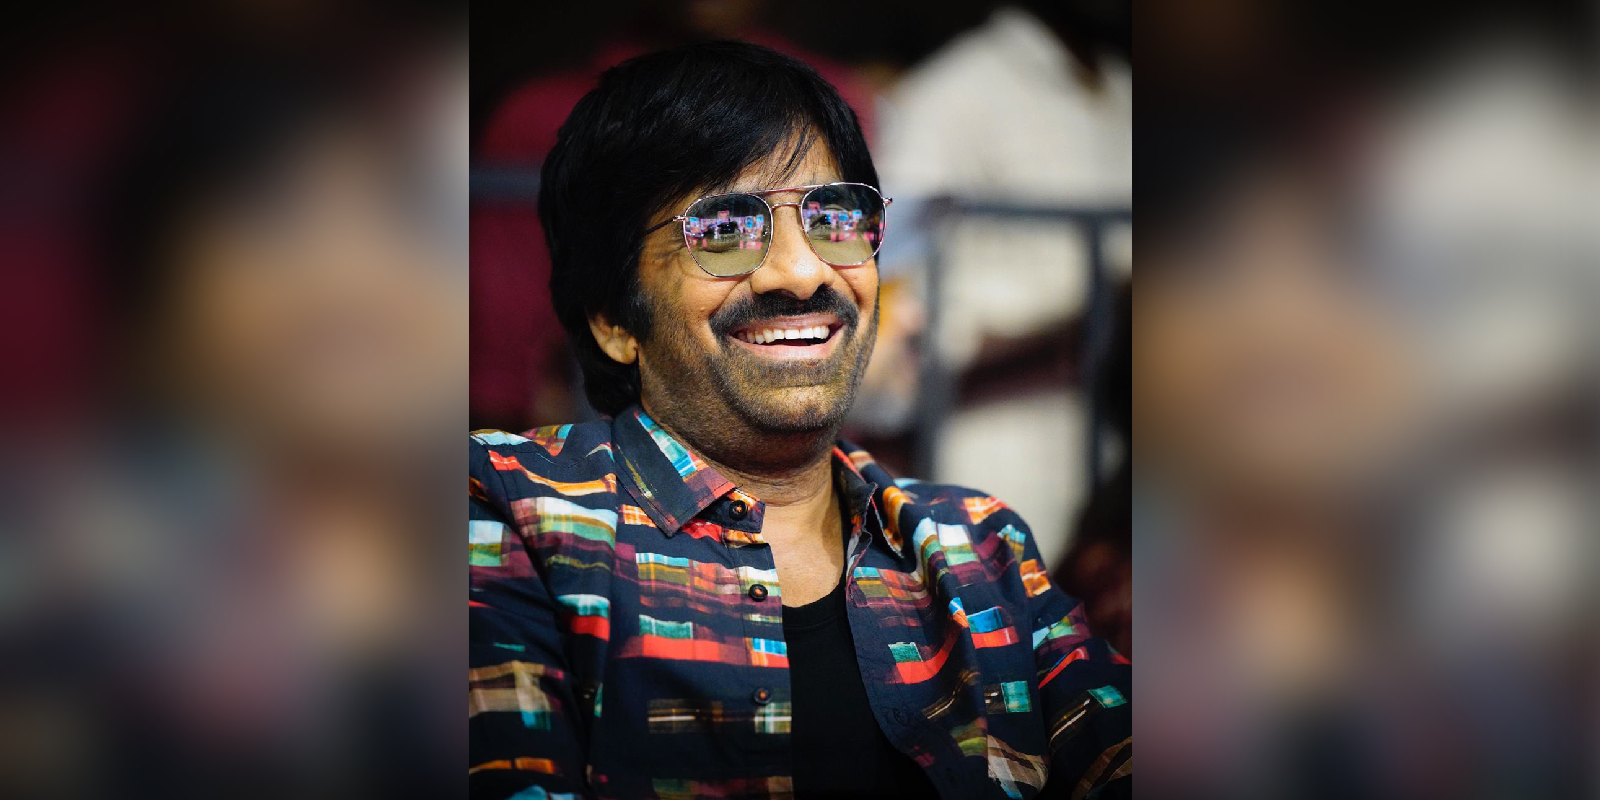 Ravi Teja pins his hopes on Dhamaka - The South First